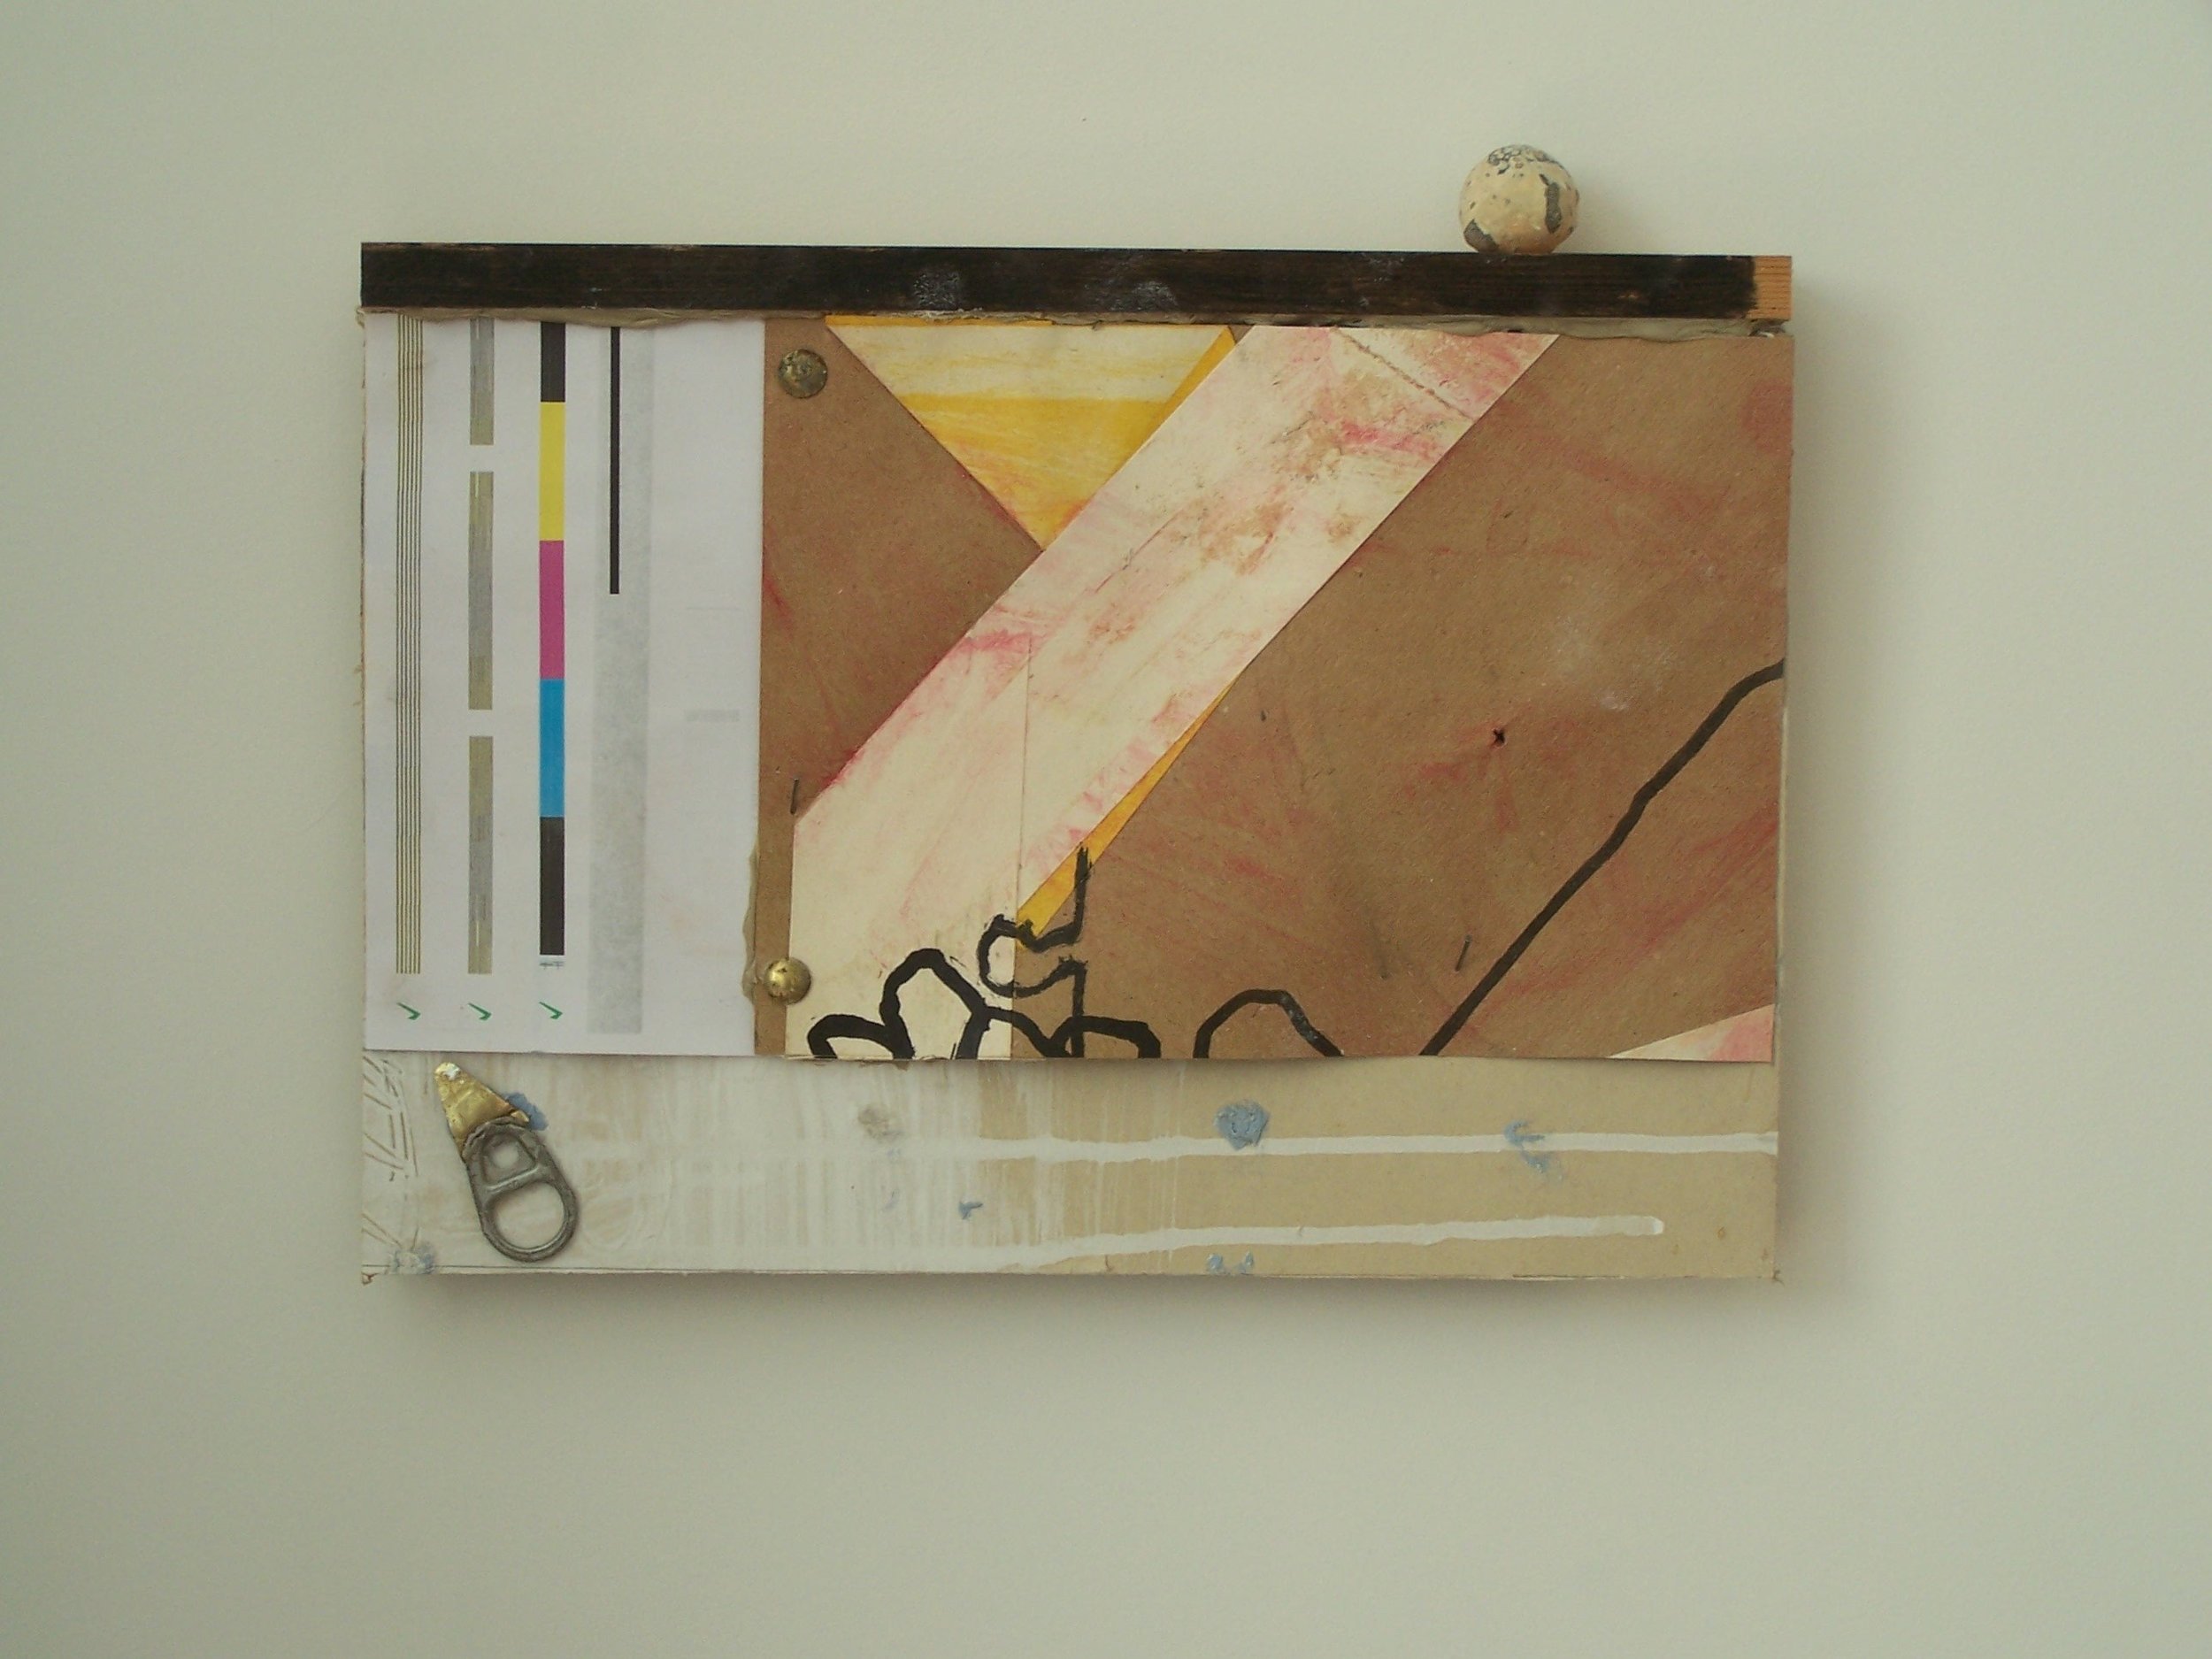 Ashley West. Piece with upper yellow triangle. Mixed media on plaster board. 33 x 23 cm. 2012..JPG